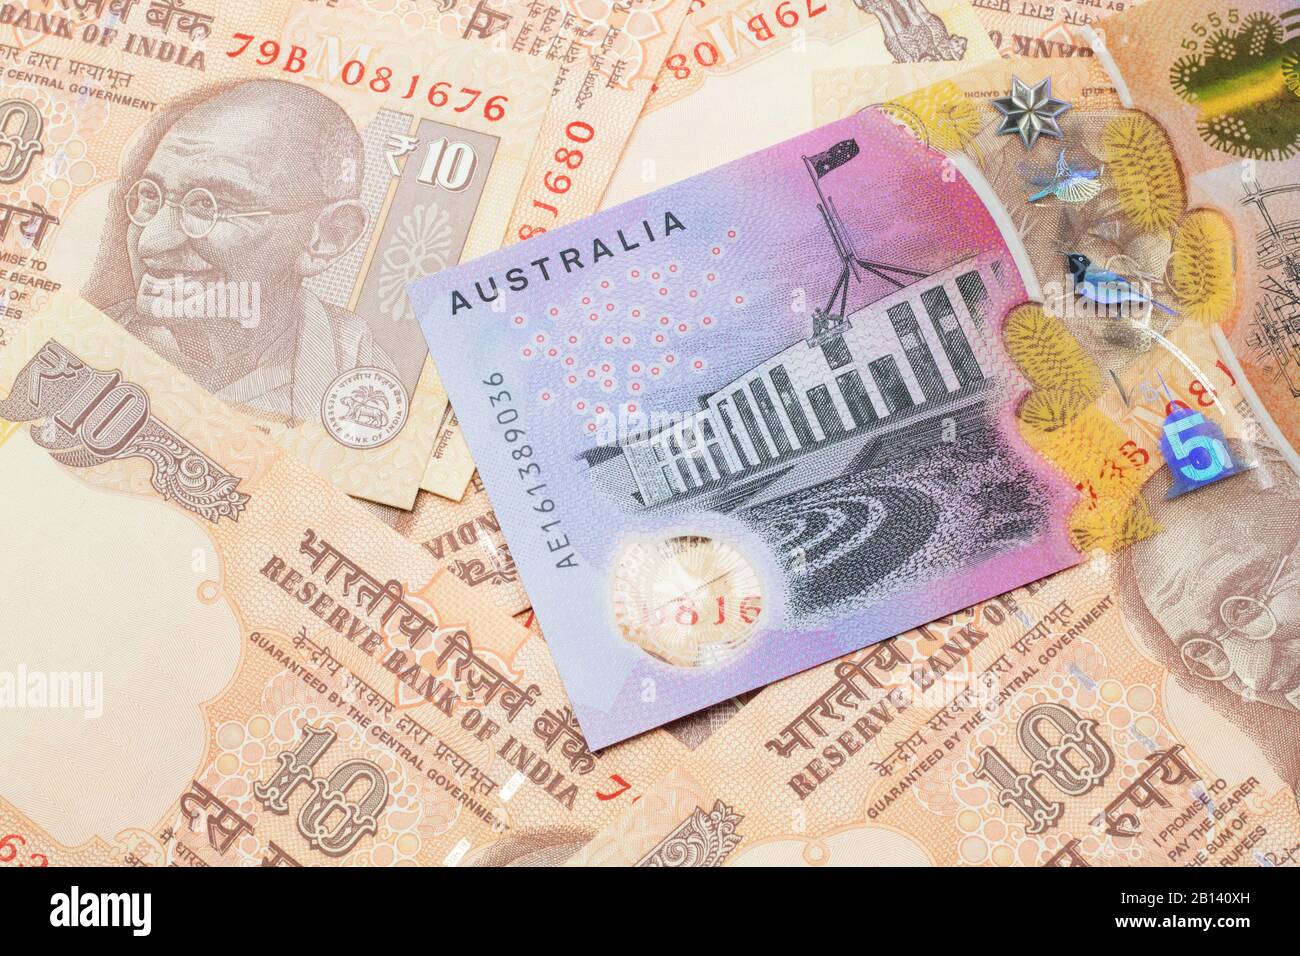 1 Australian Dollar High Resolution Stock Photography and Images - Alamy